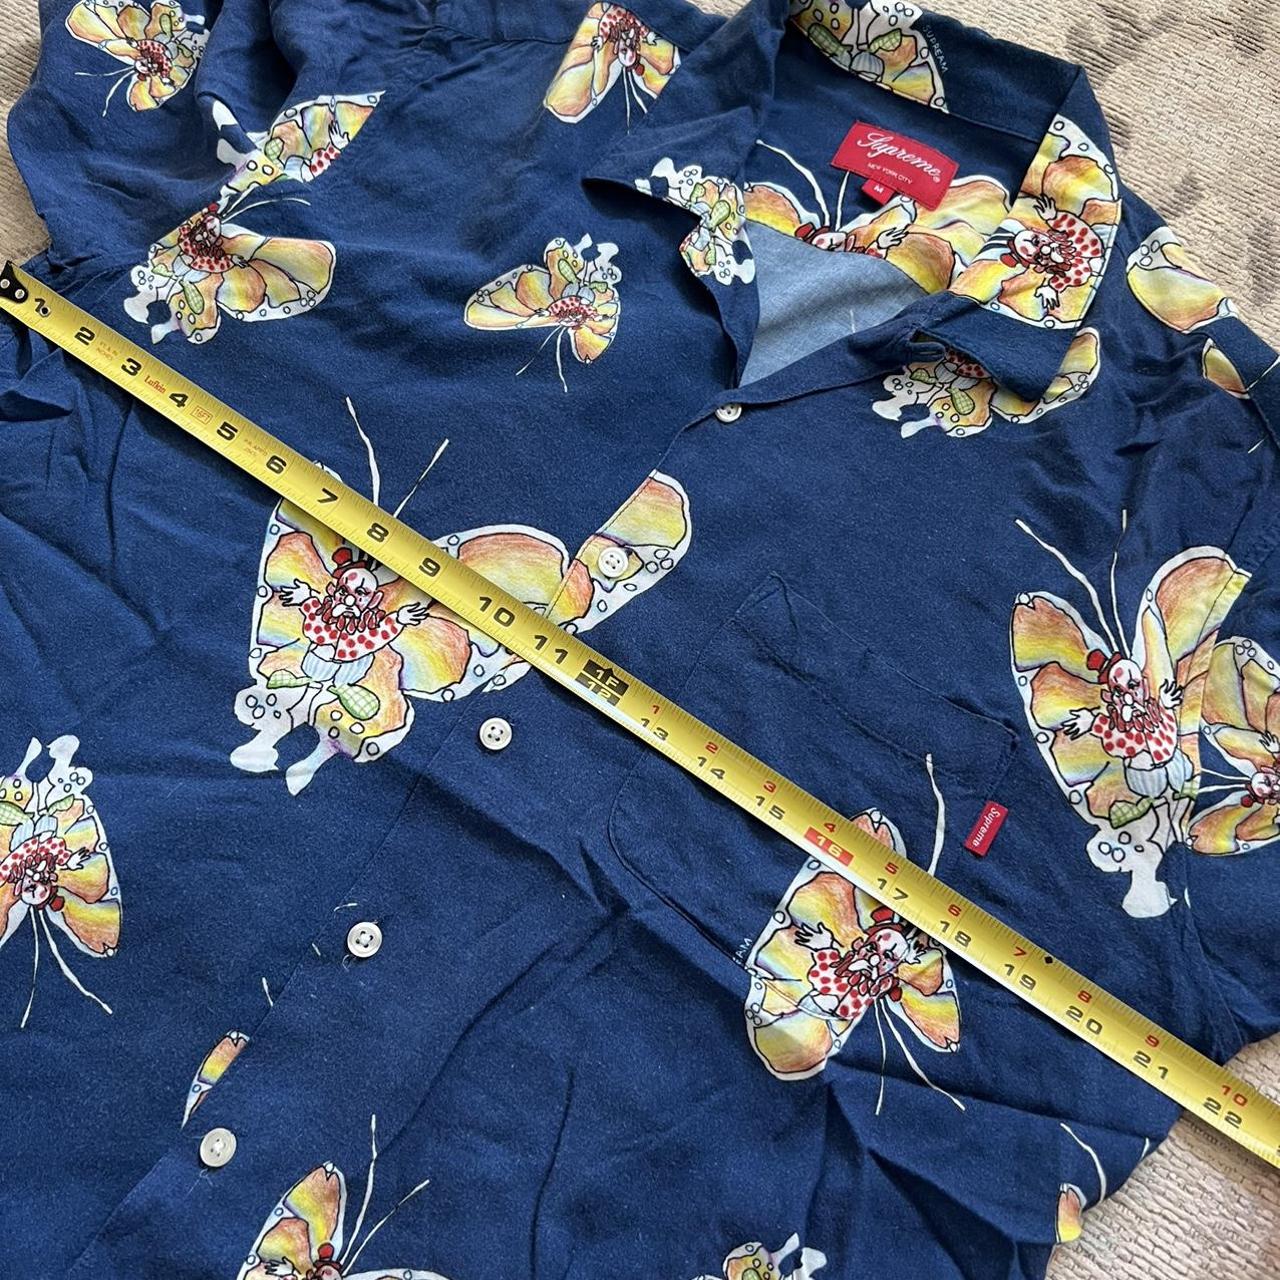 Supreme Gonz Butterfly Rayon Shirt, Perfect condition